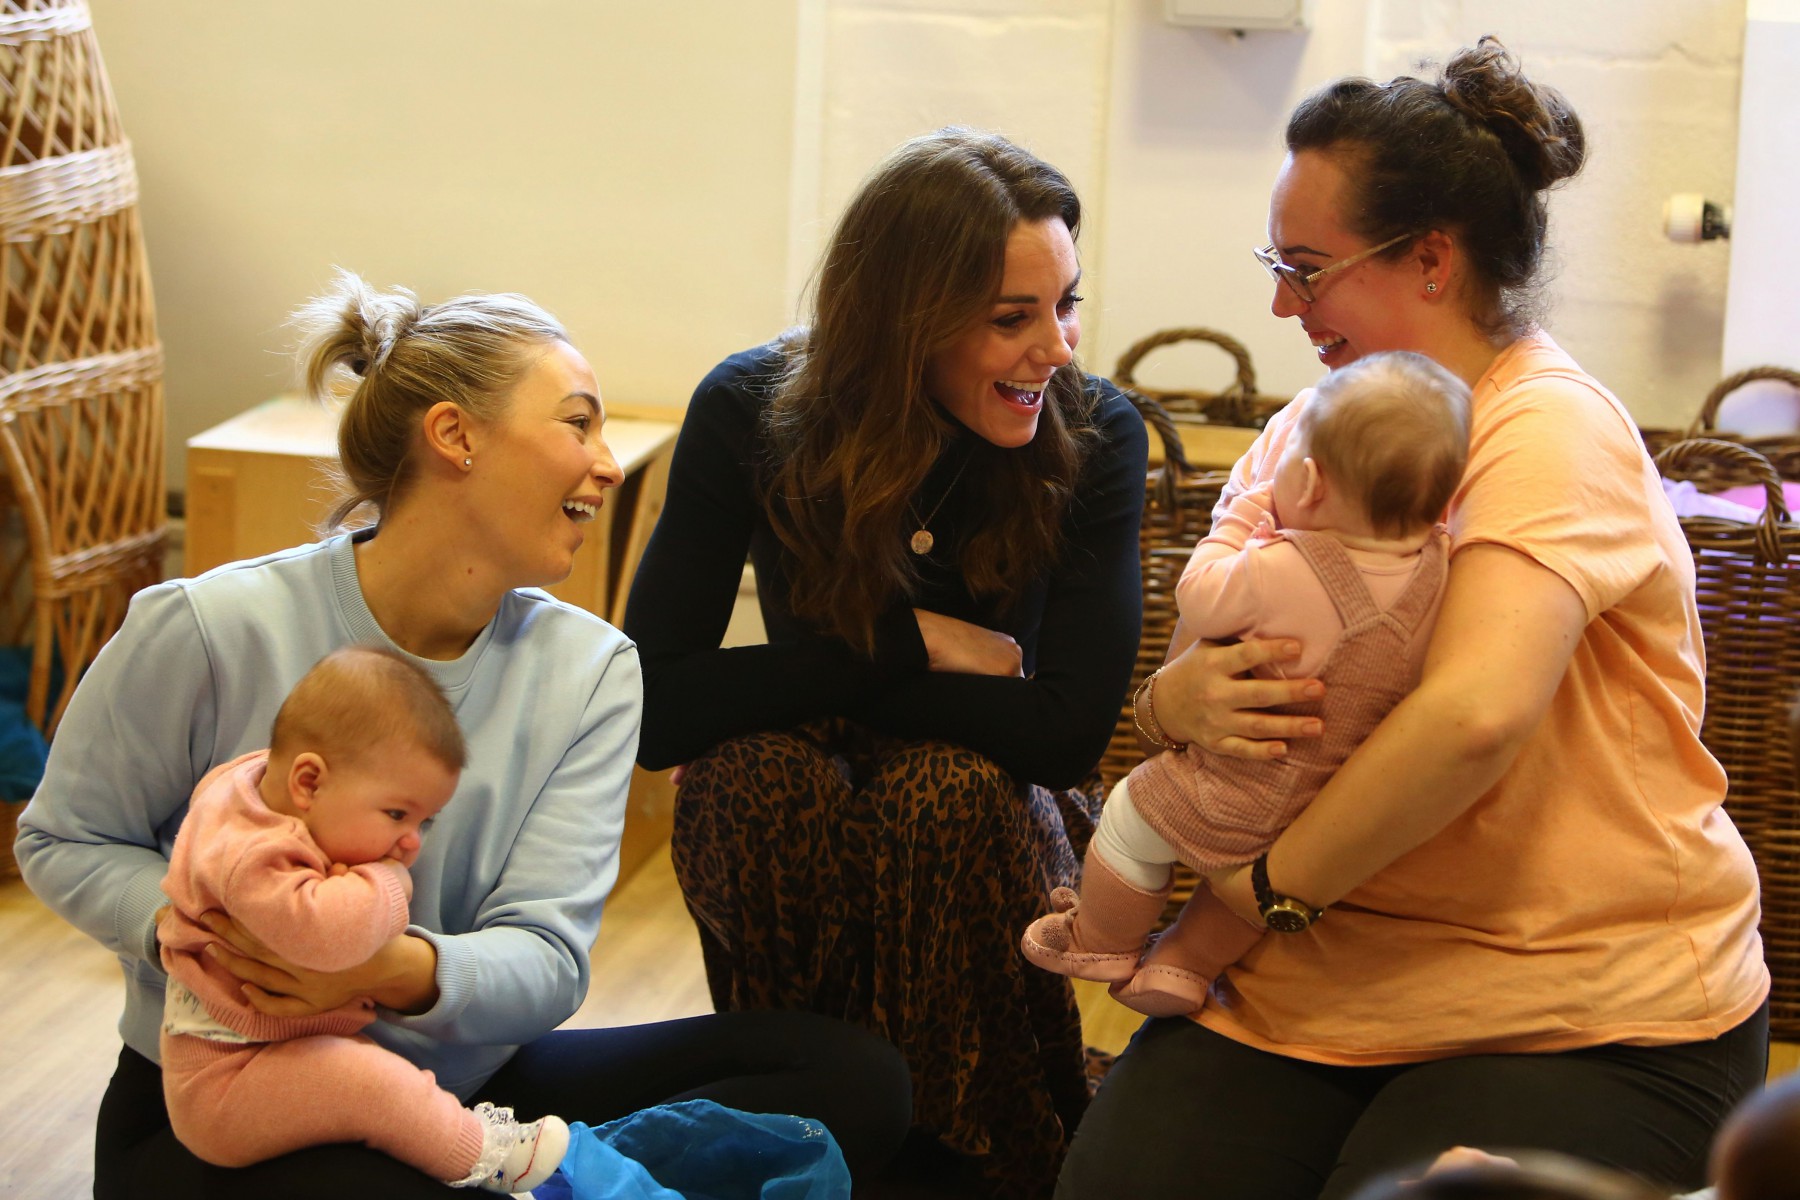 Kate Middleton was seen cooing over a little baby at the Ely & Caerau Children's Centre in Cardiff